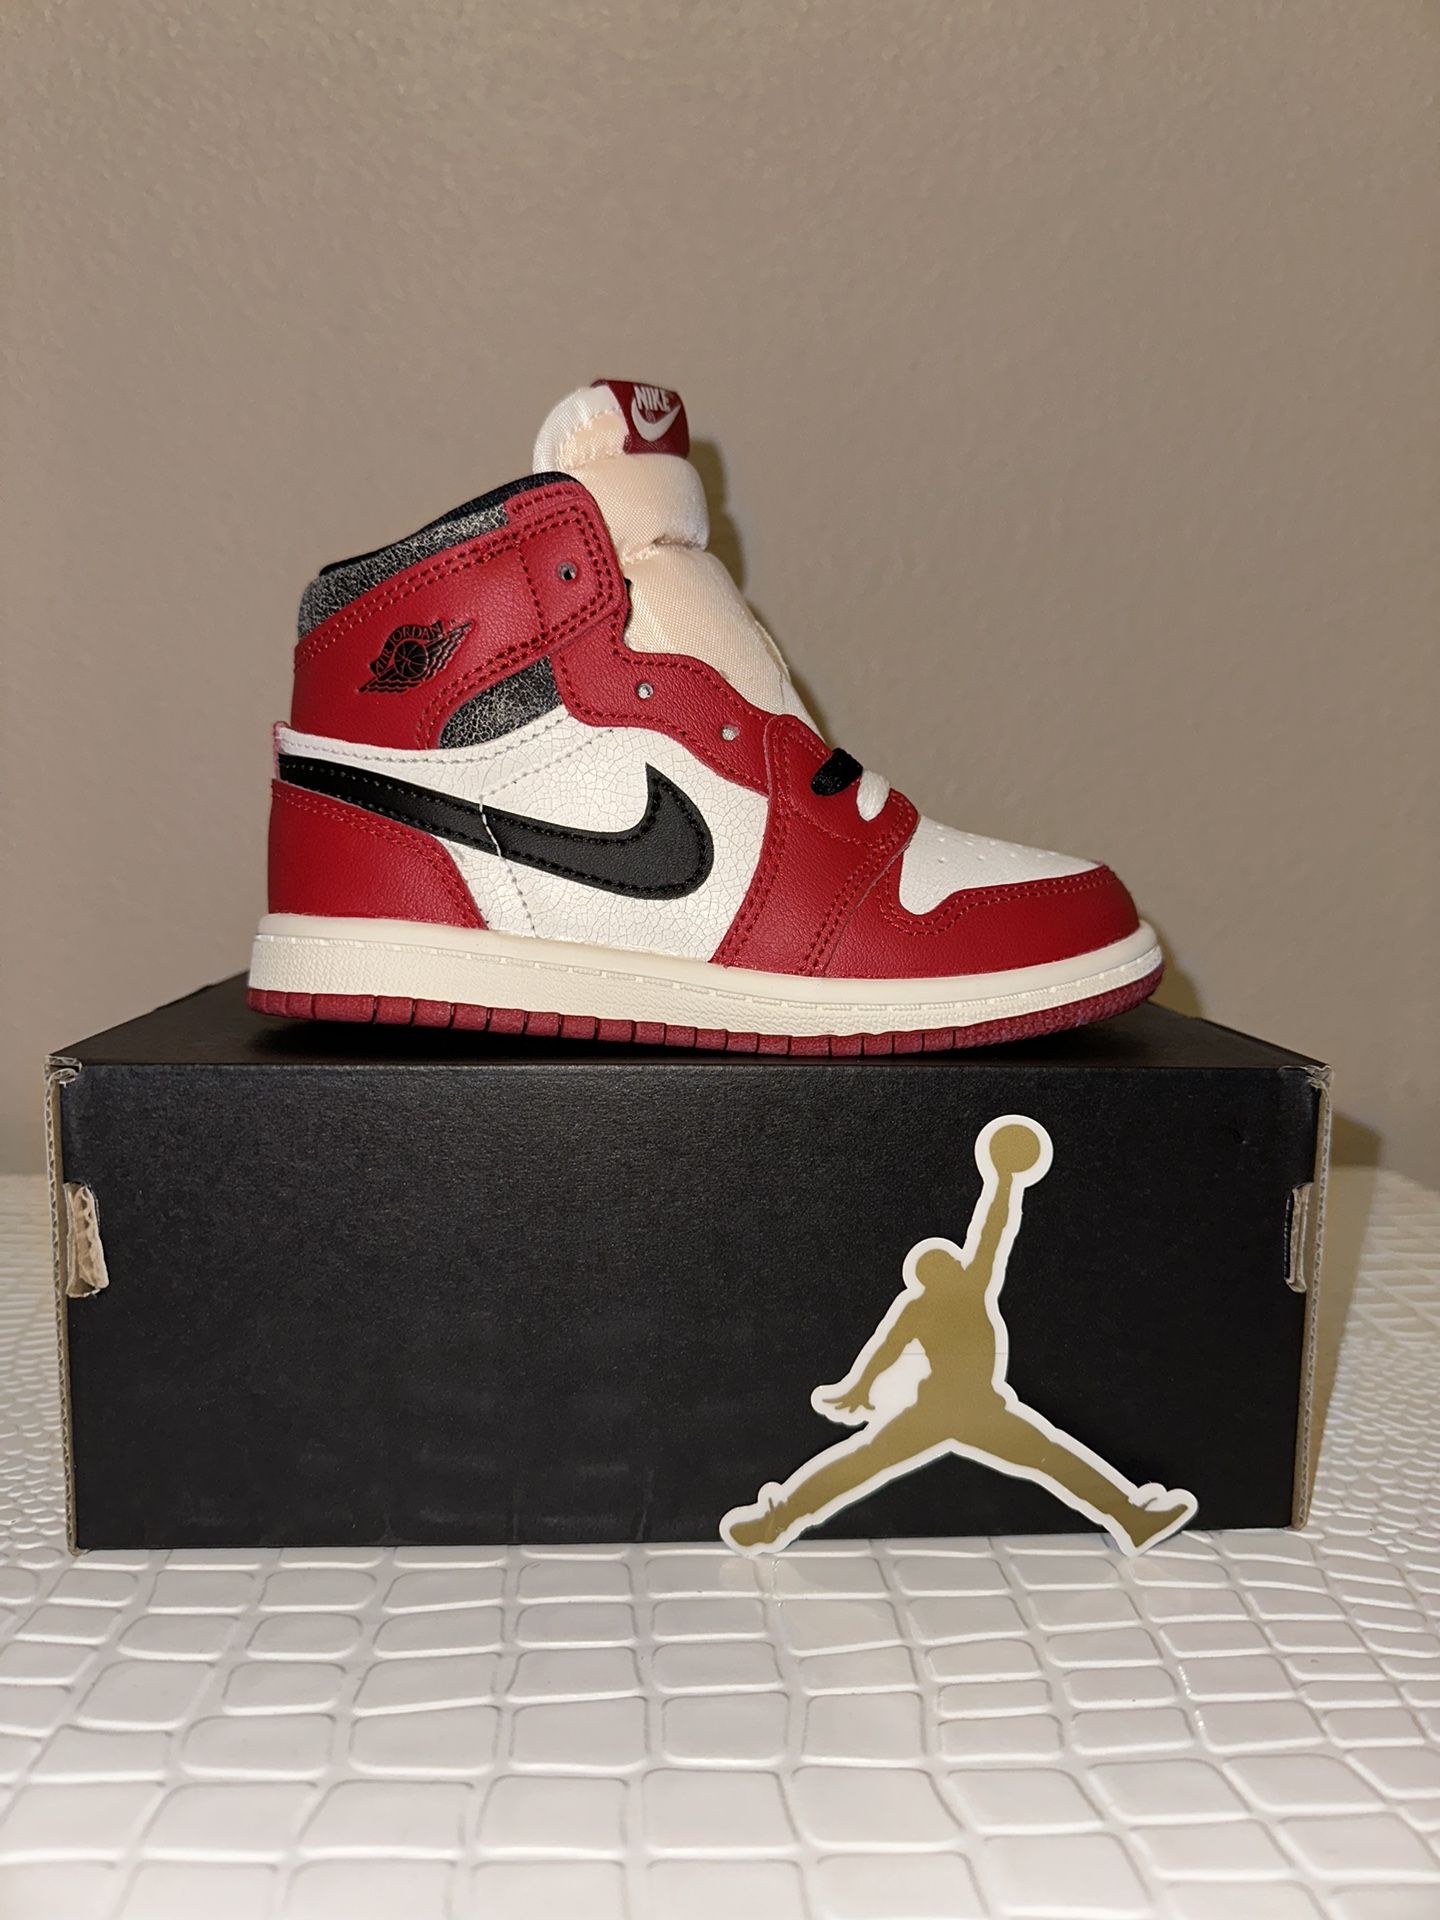 Nike Air Jordan Retro 1 High OG “Lost And Found Chicago” TD Size 10C New